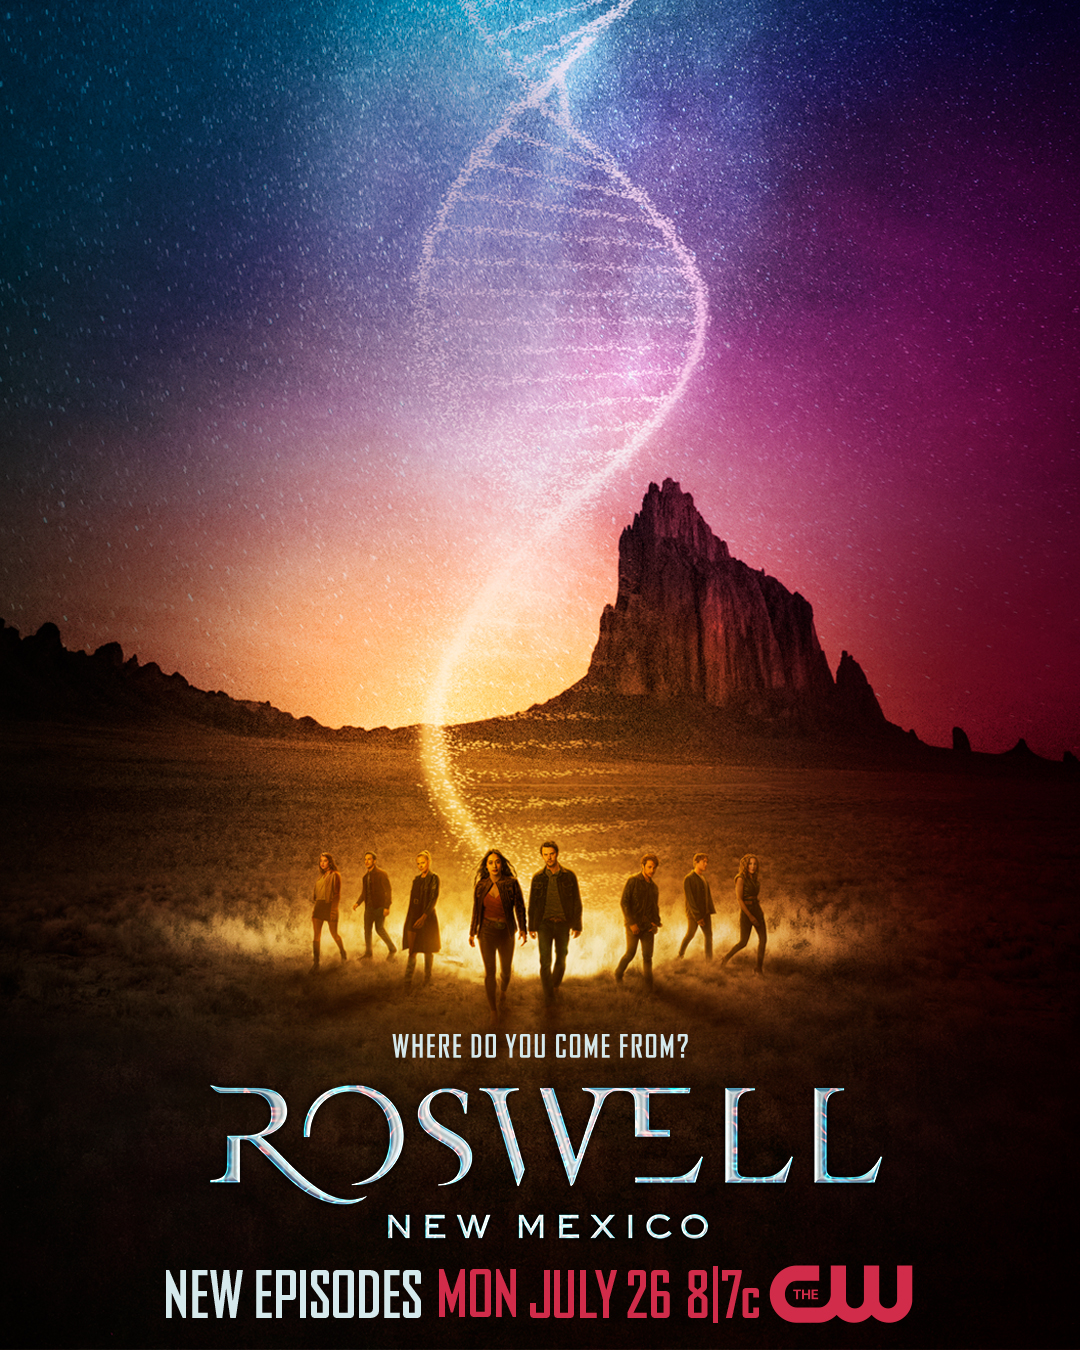 Out Of This World: Point Classics track placed in CW show ‘Roswell, New Mexico’